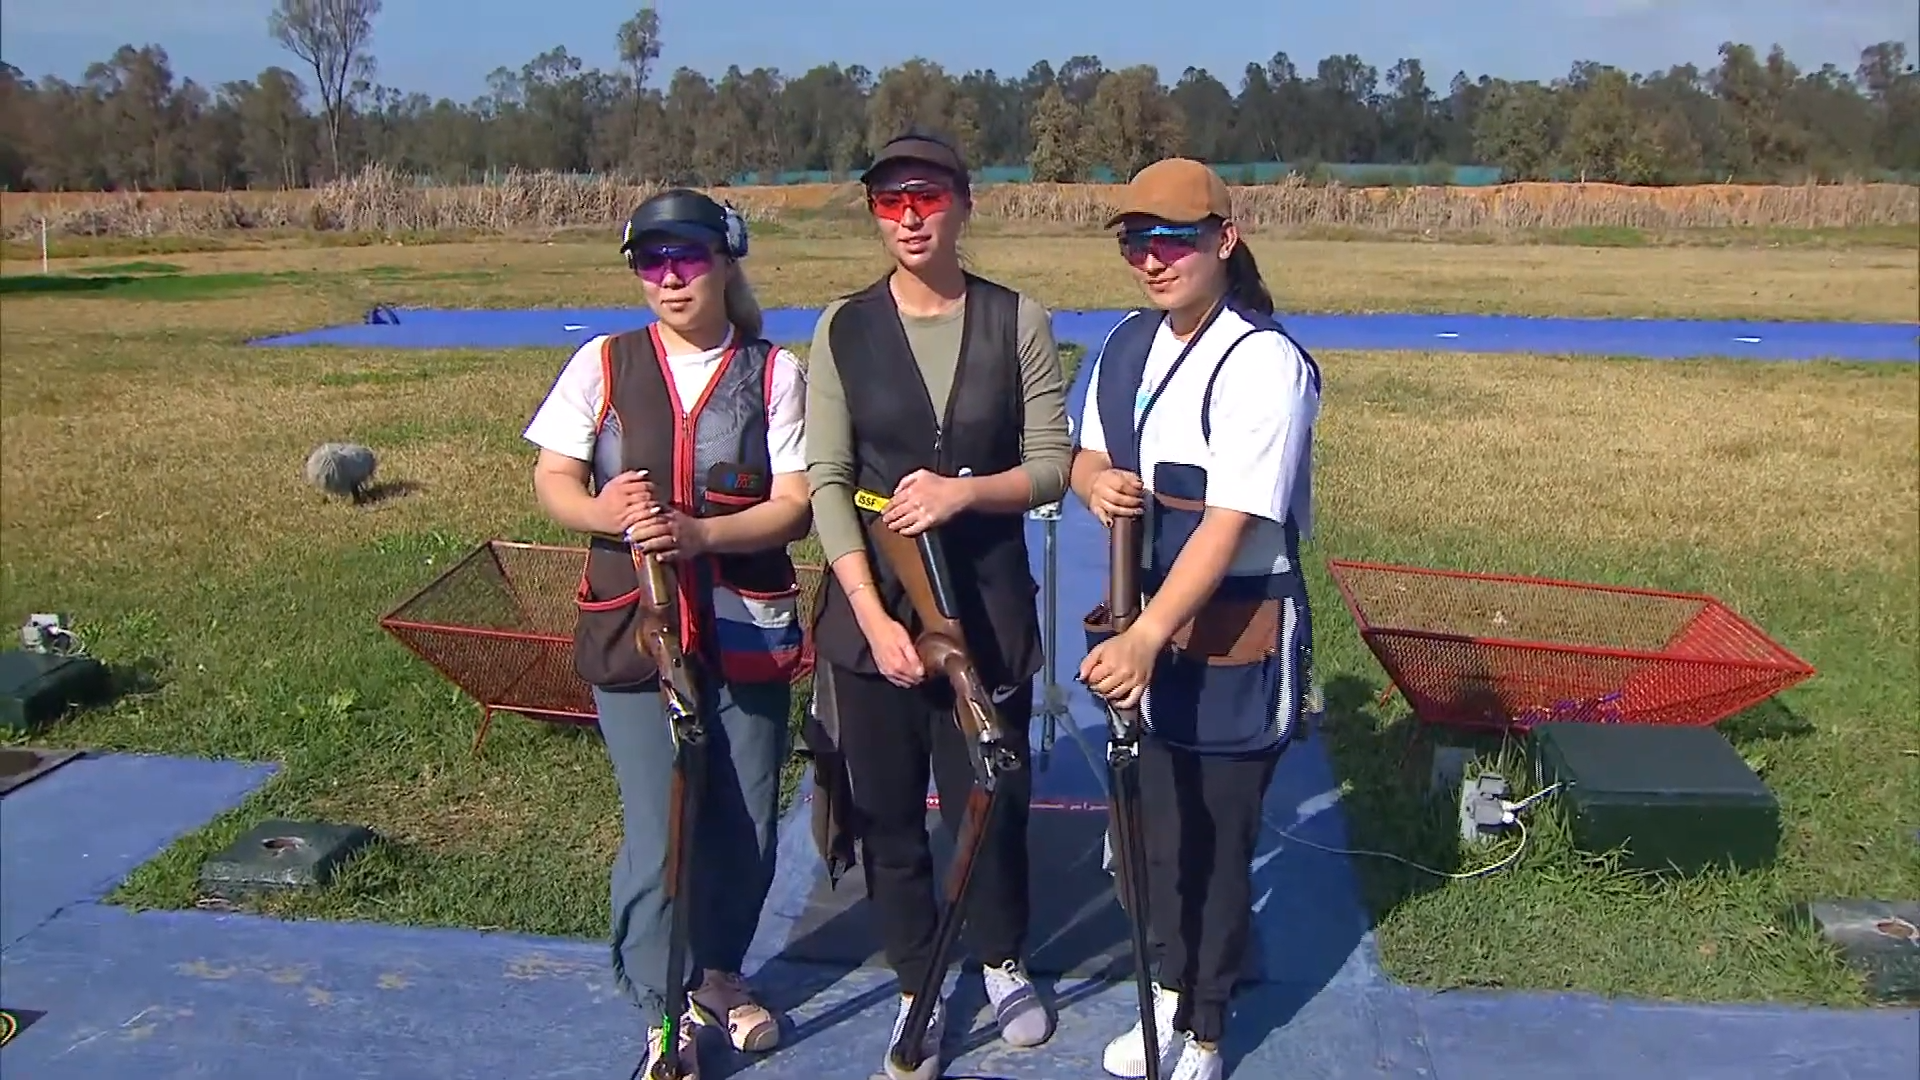 Russia enjoyed a podium clean sweep in the women's event ©/YouTubeISSF